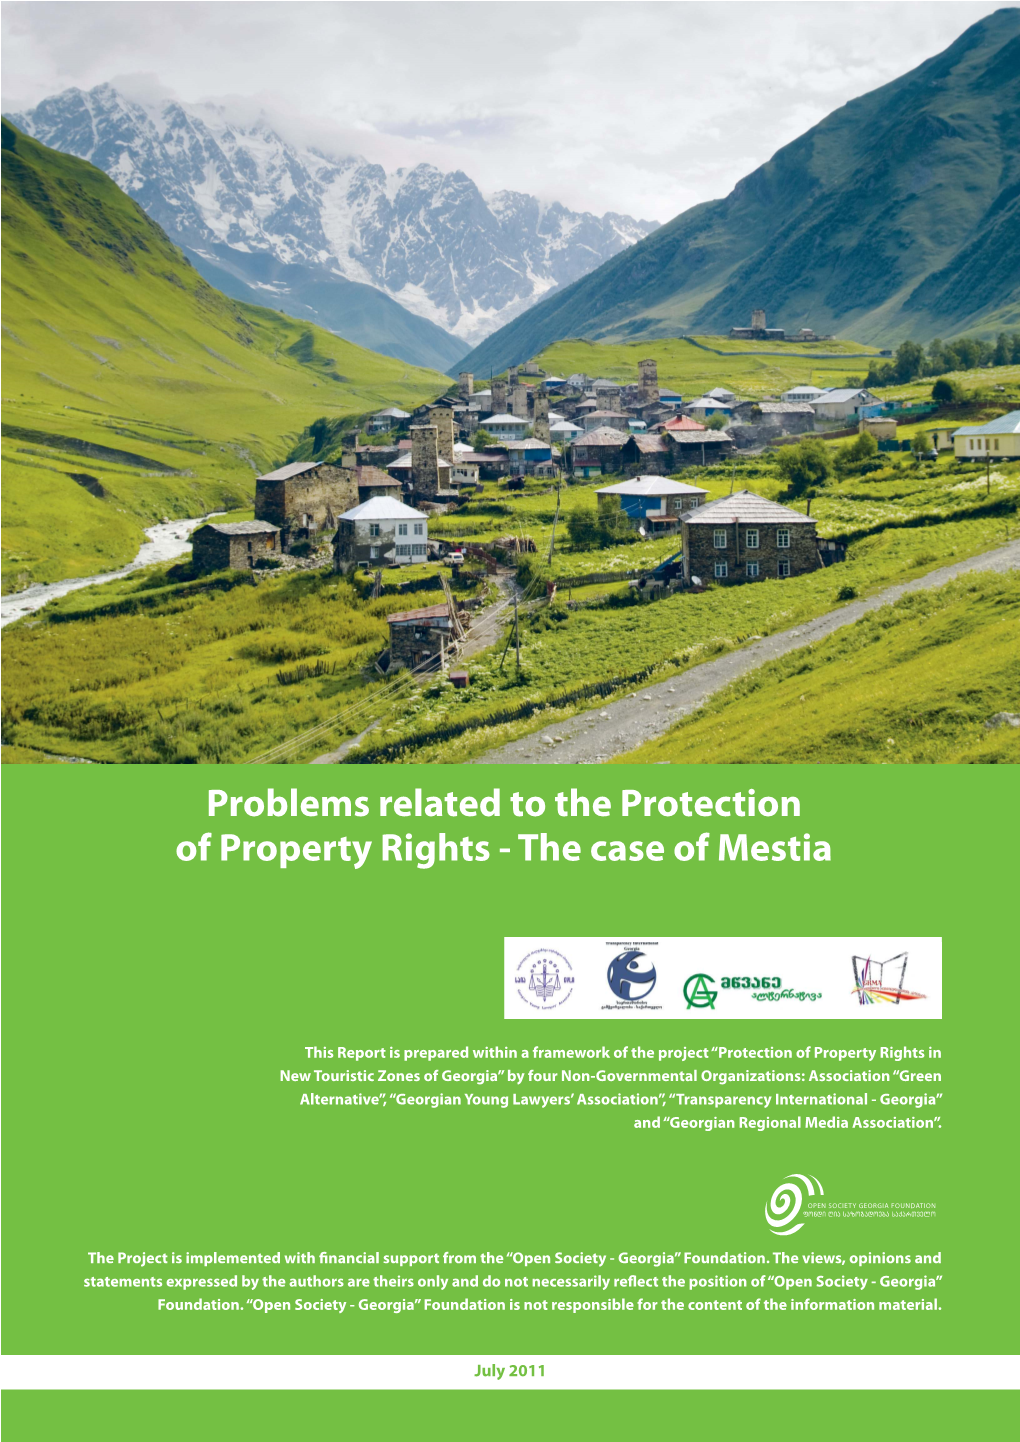 Problems Related to the Protection of Property Rights - the Case of Mestia